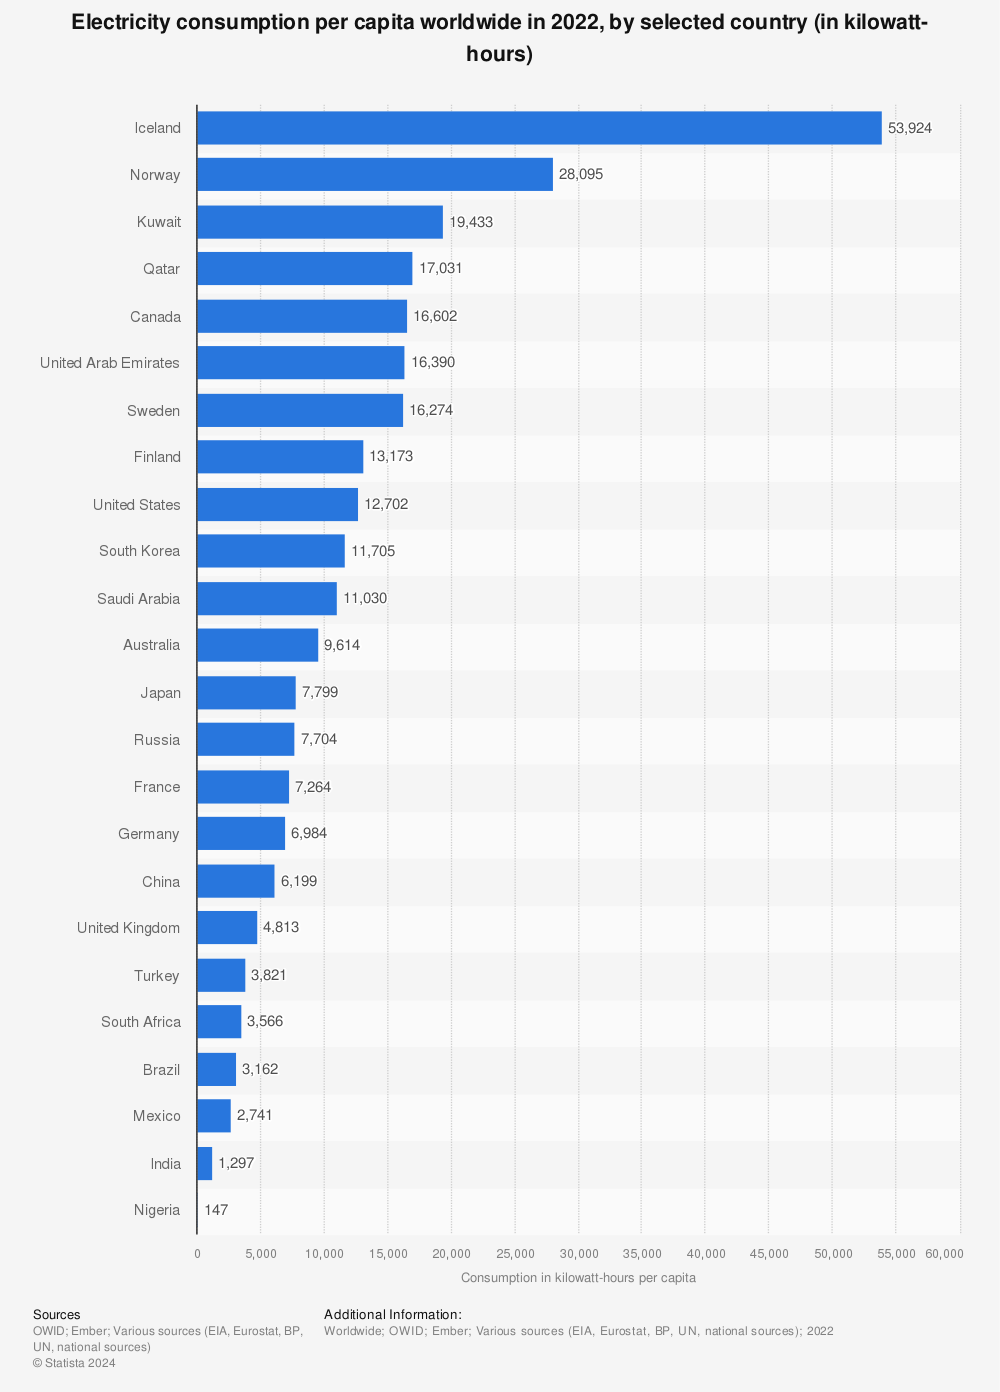 Statistic: Electricity consumption per capita worldwide in 2020, by selected country (in kilowatt-hours) | Statista